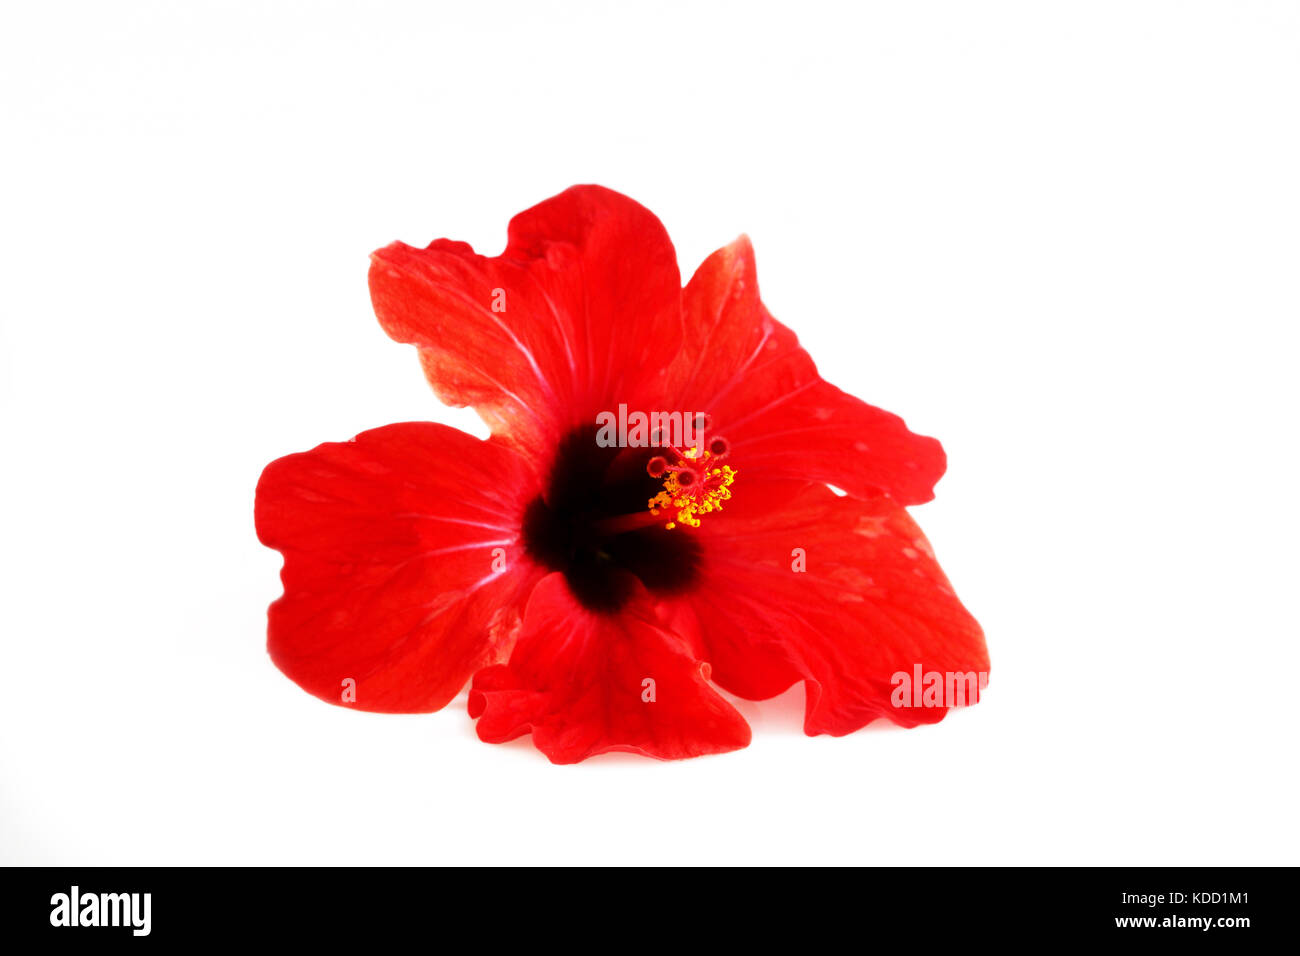 Red flower hibiscus family Malvaceae on a white background. Isolated. Stock Photo